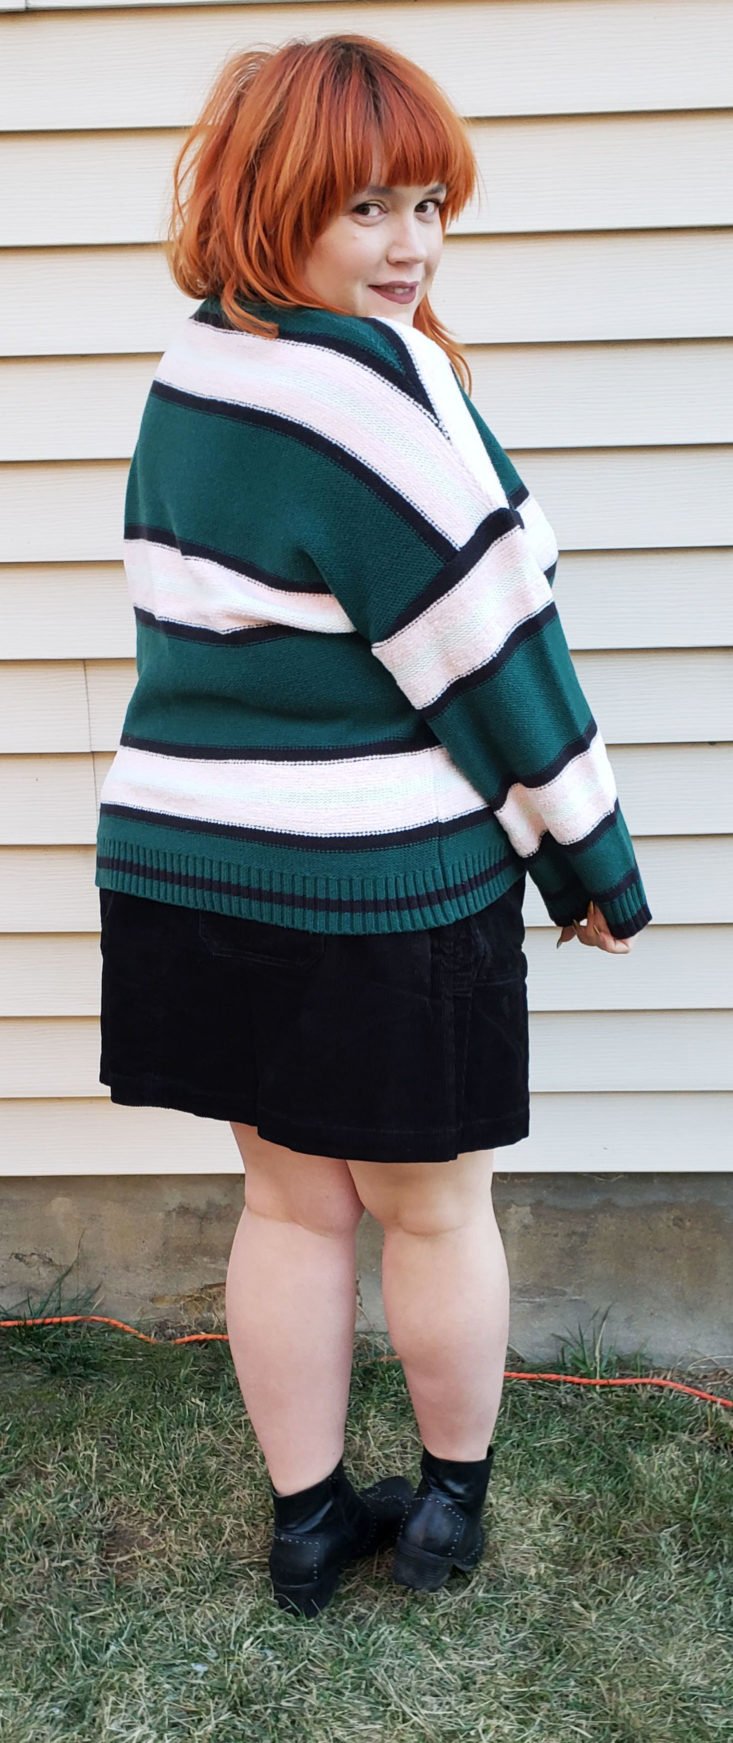 Trunk Club Plus Size Subscription Box Review December 2018 - Everyday Stripe Sweater by BP Size 2x Pose 3 Side